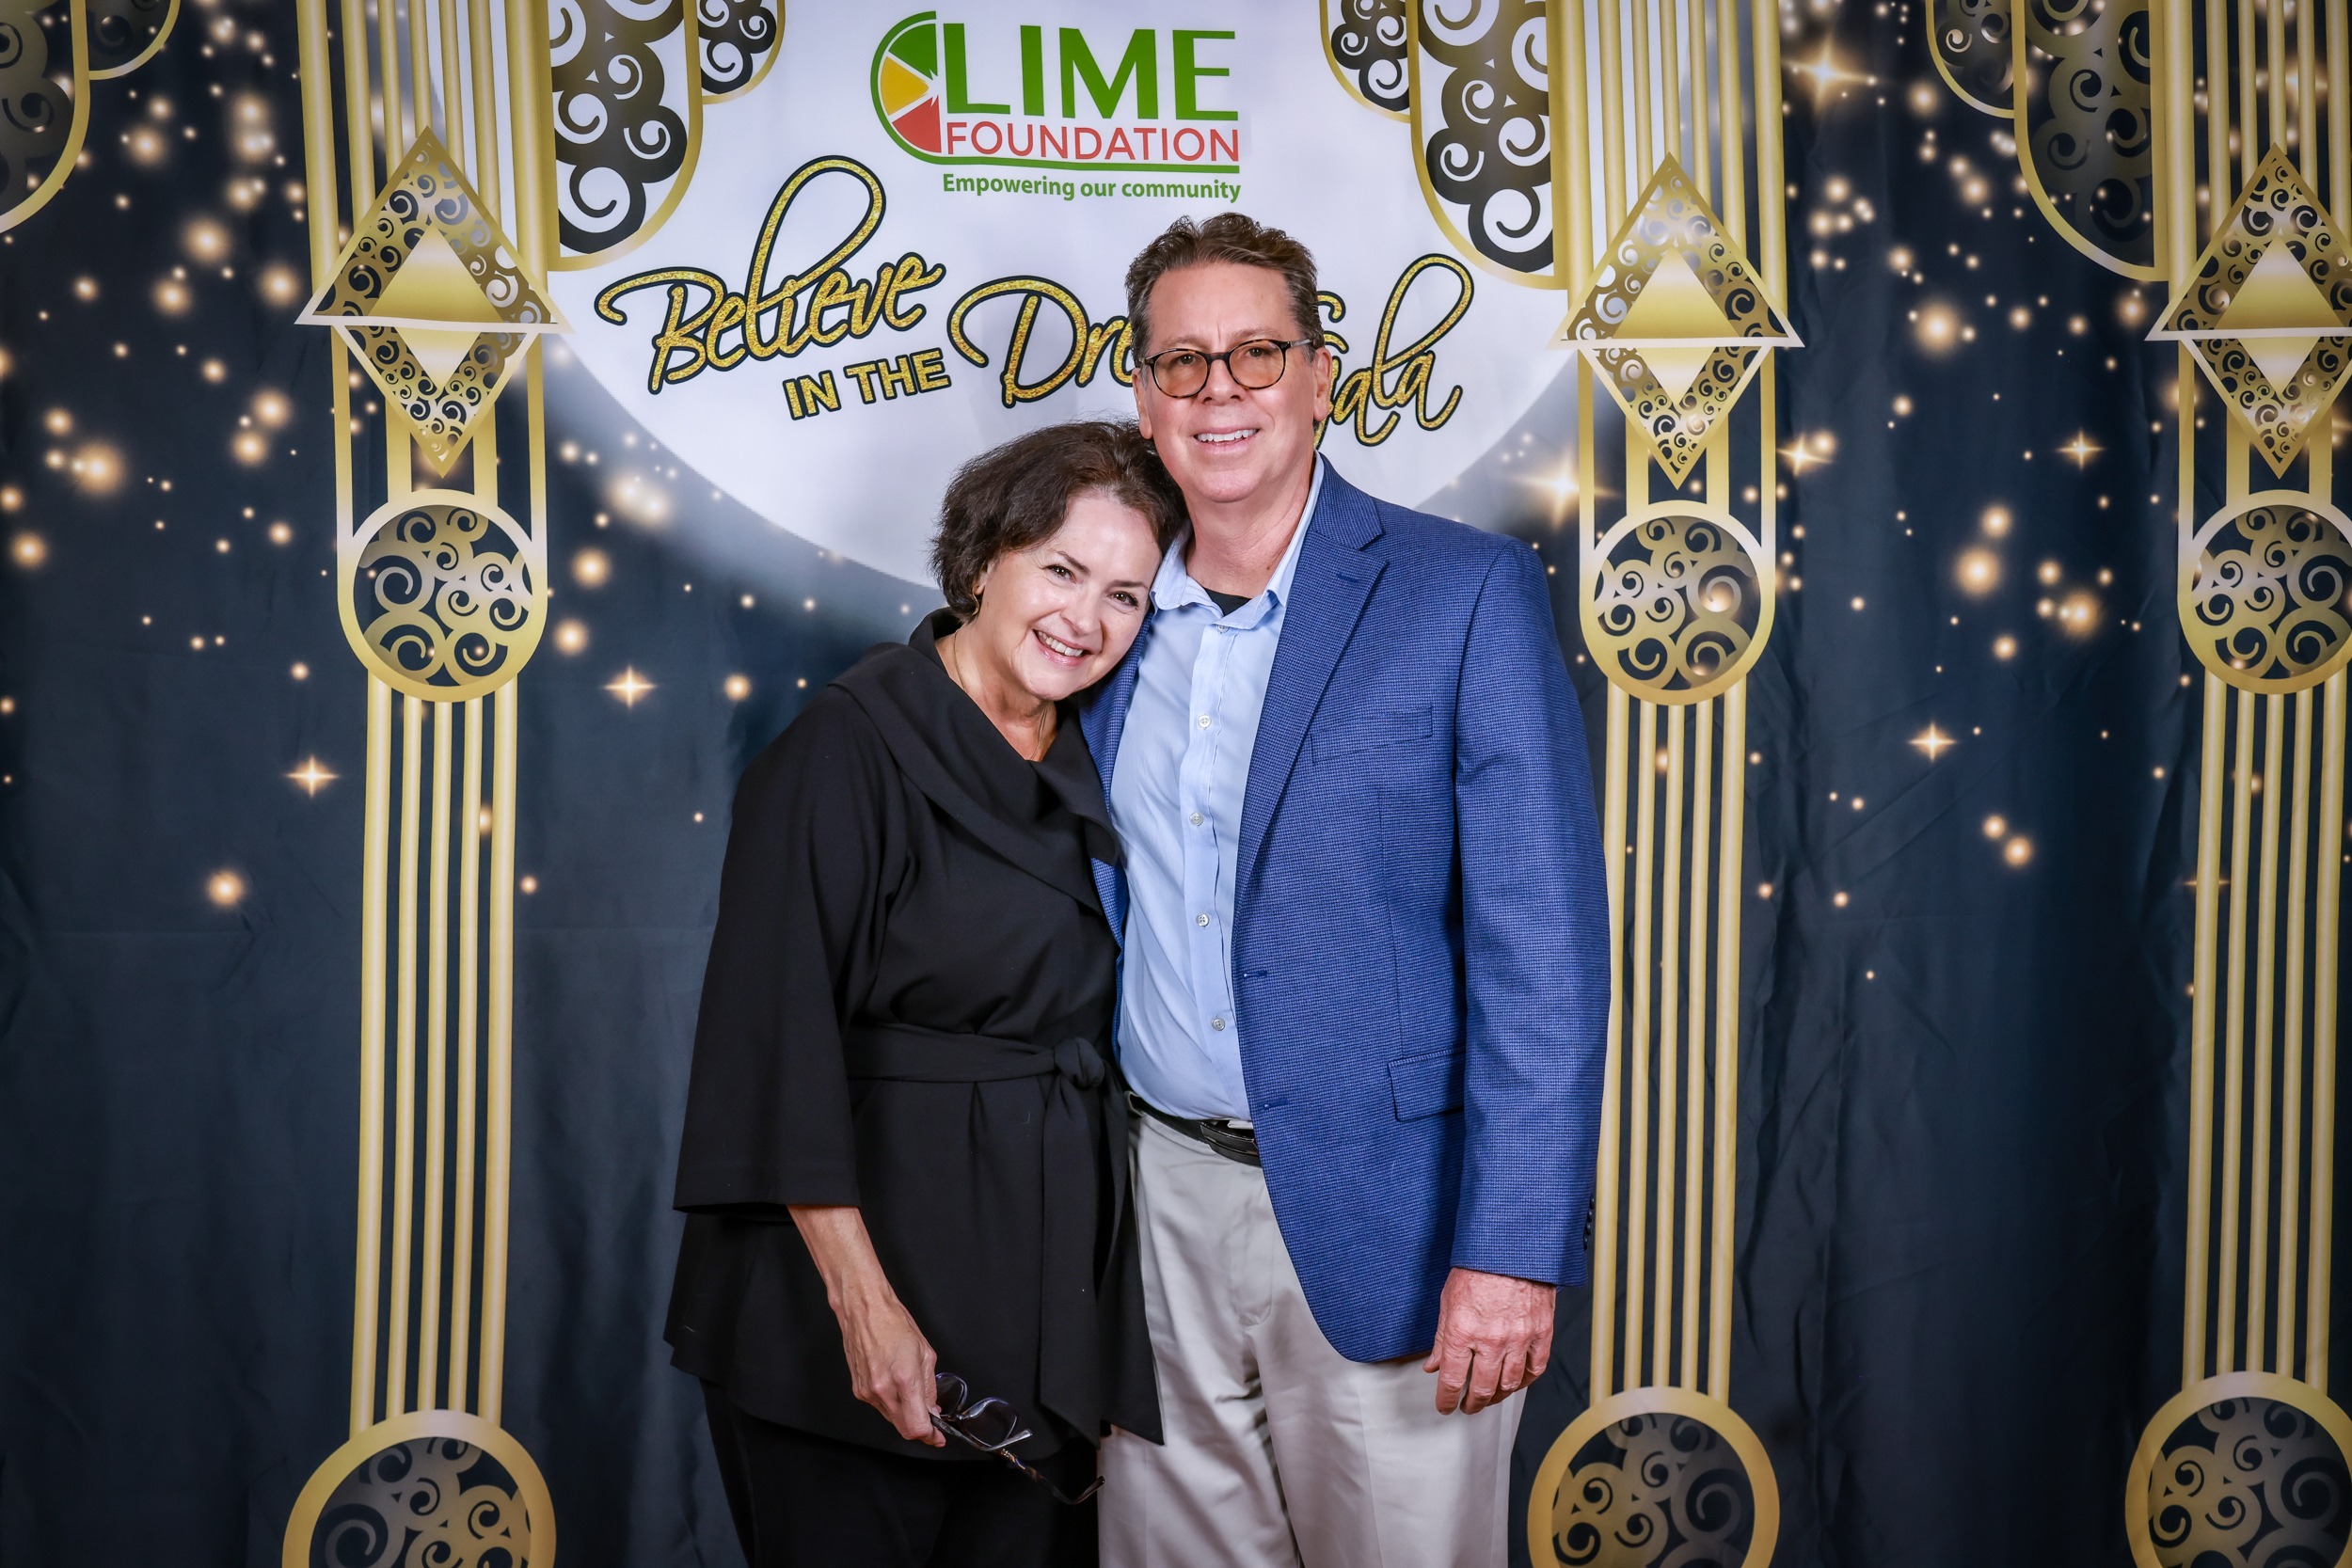 A man and woman posing for a photo at a party hosted by The LIME Foundation of Santa Rosa.